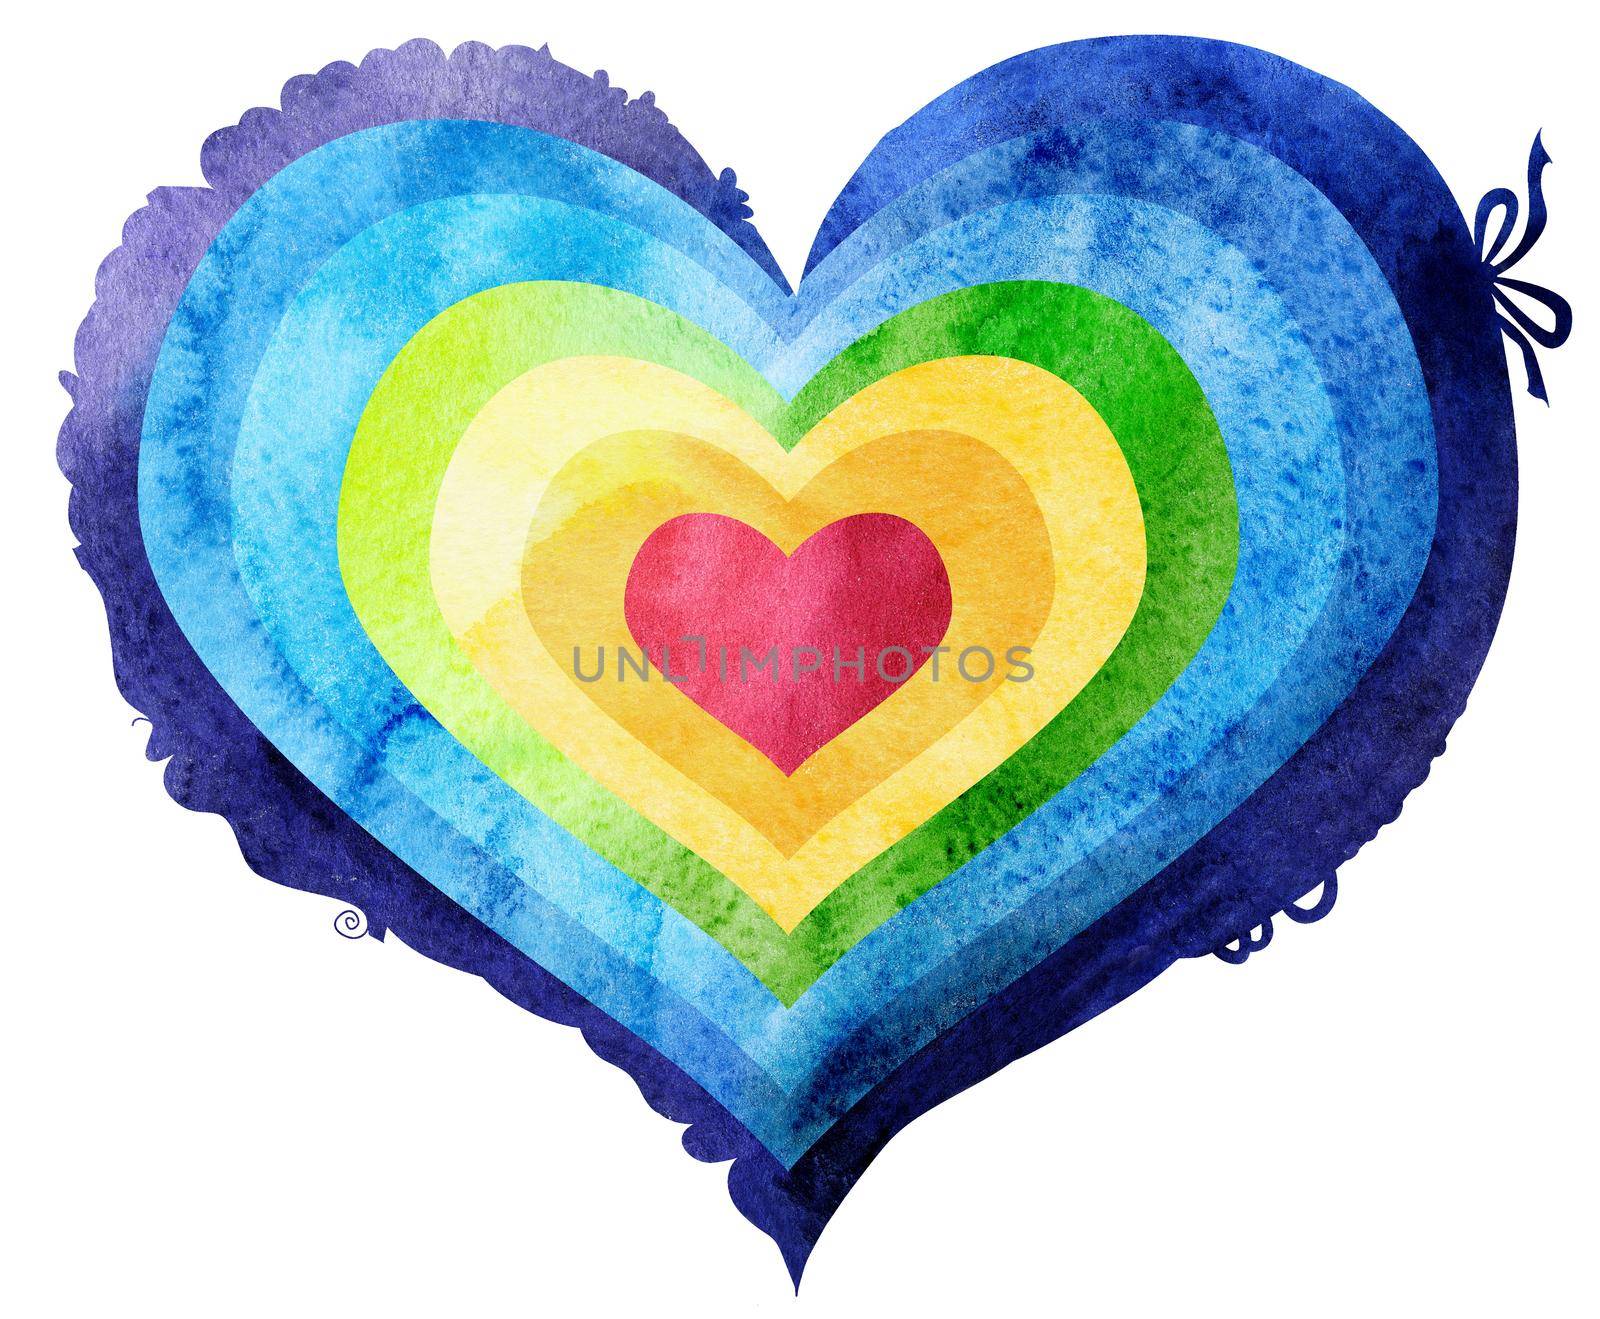 Watercolor textured rainbow heart with a lace edge by NataOmsk